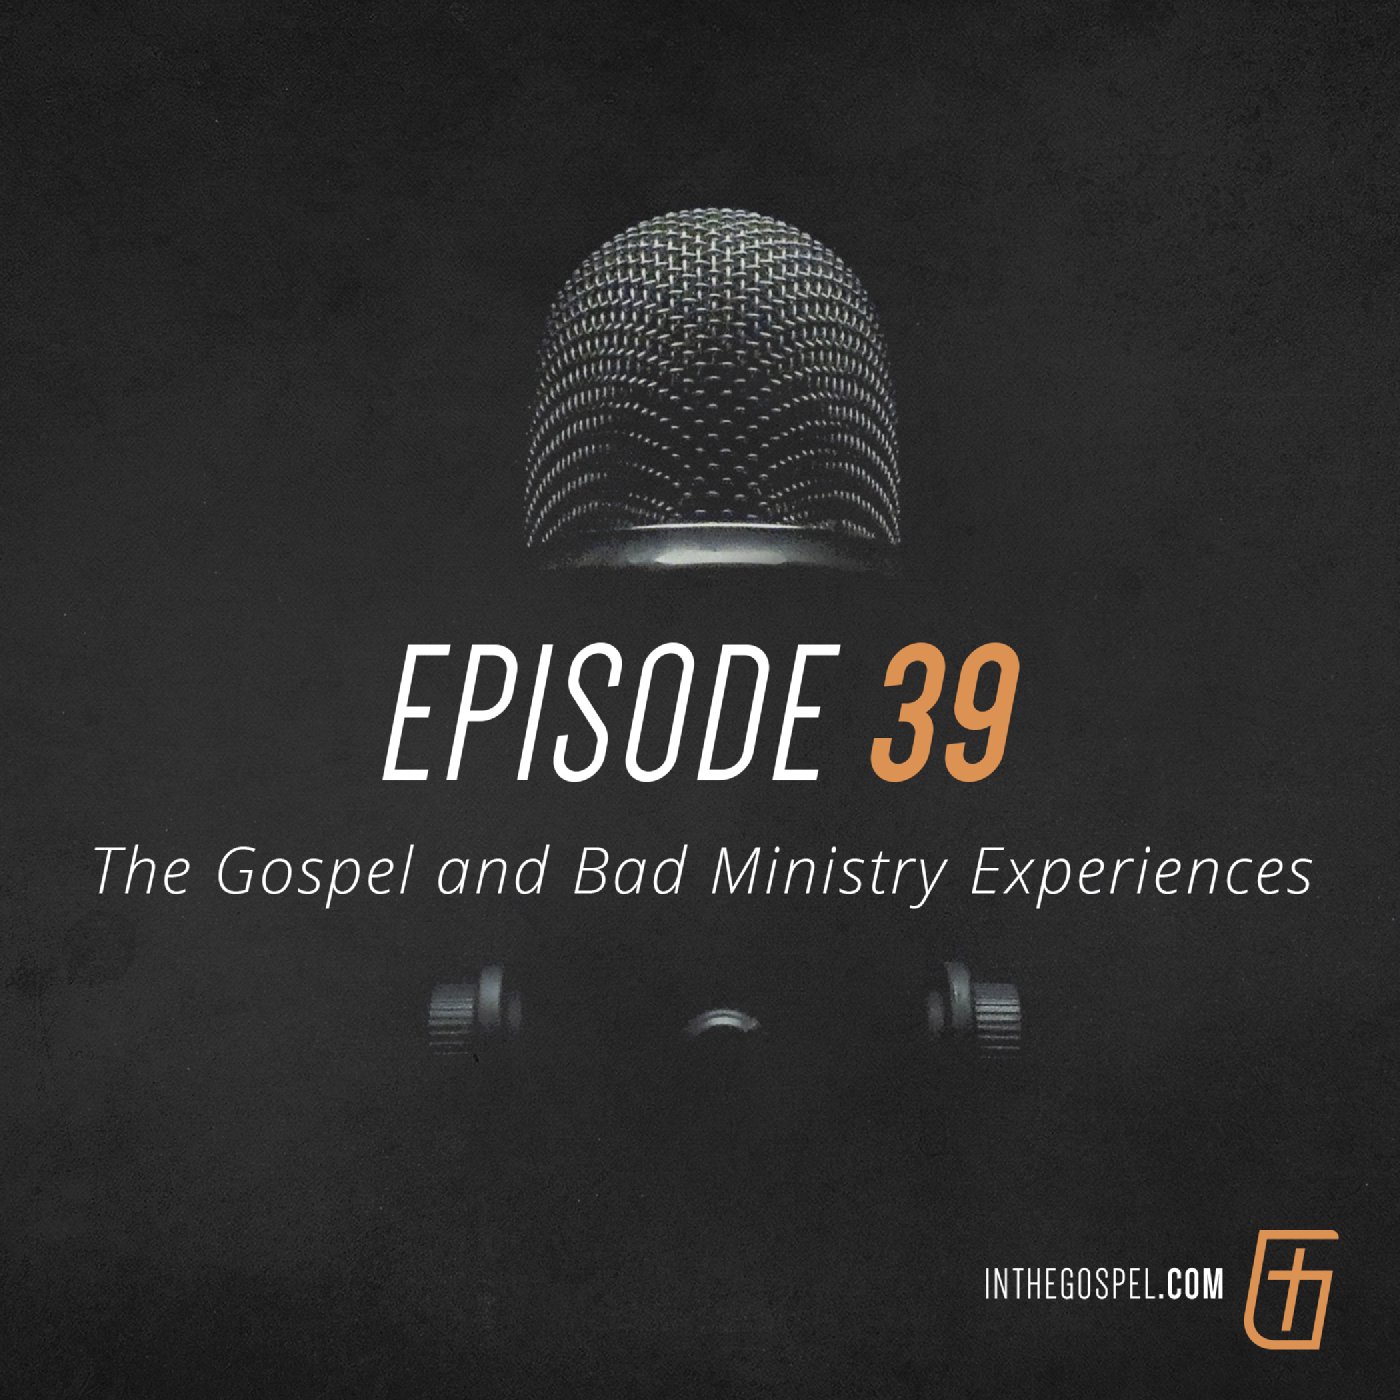 Episode 39: The Gospel and Bad Ministry Experiences (Part 2)